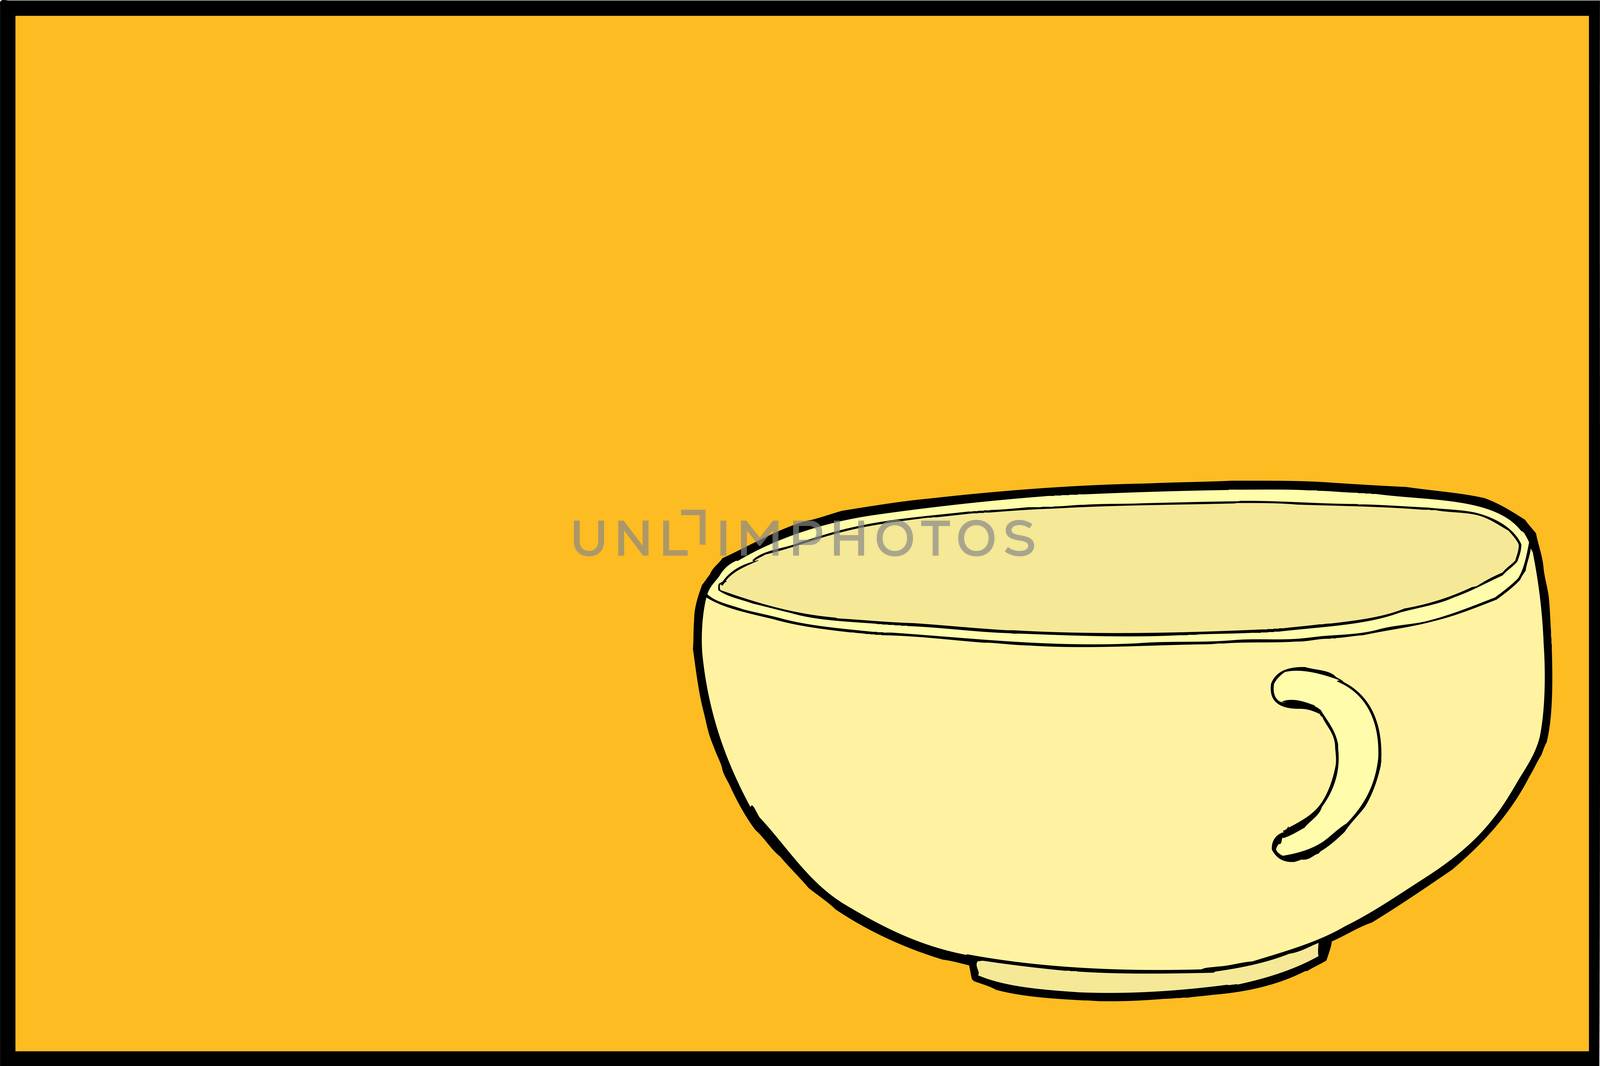 Single illustration of empty teacup over yellow background